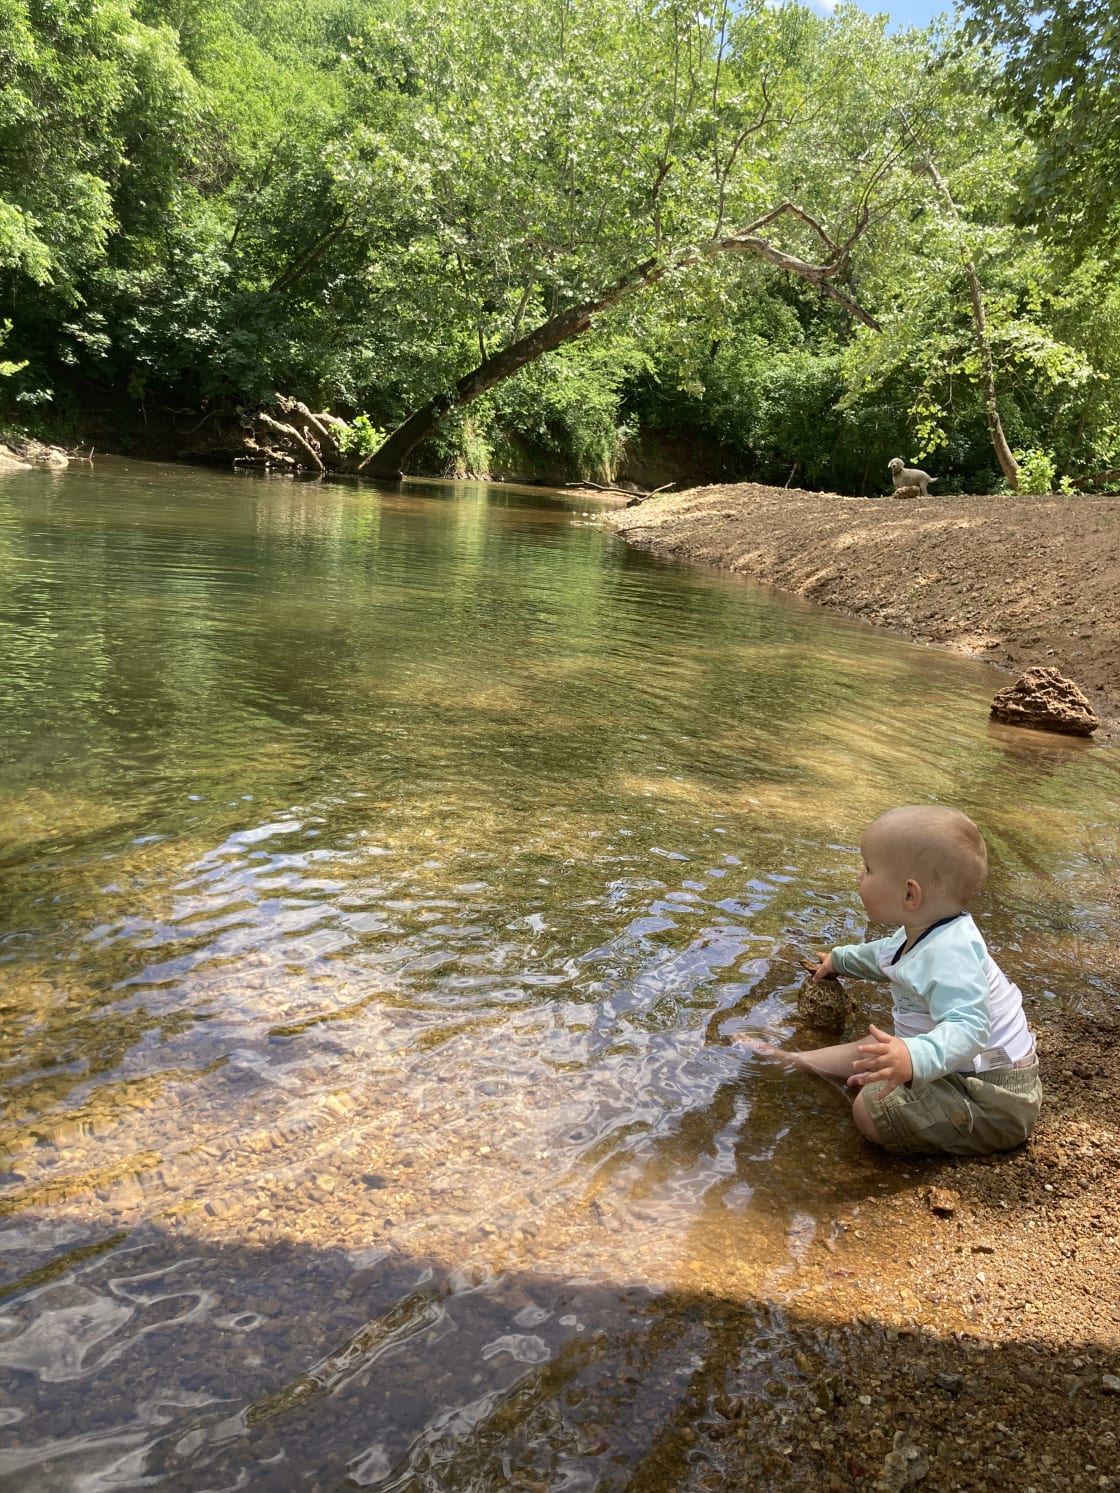 We did a combination of driving and hoping to get to the creek at Elizabeth’s place, took us about 20 minutes with young kids. It was well worth it. Here, the baby plays in the shallows 